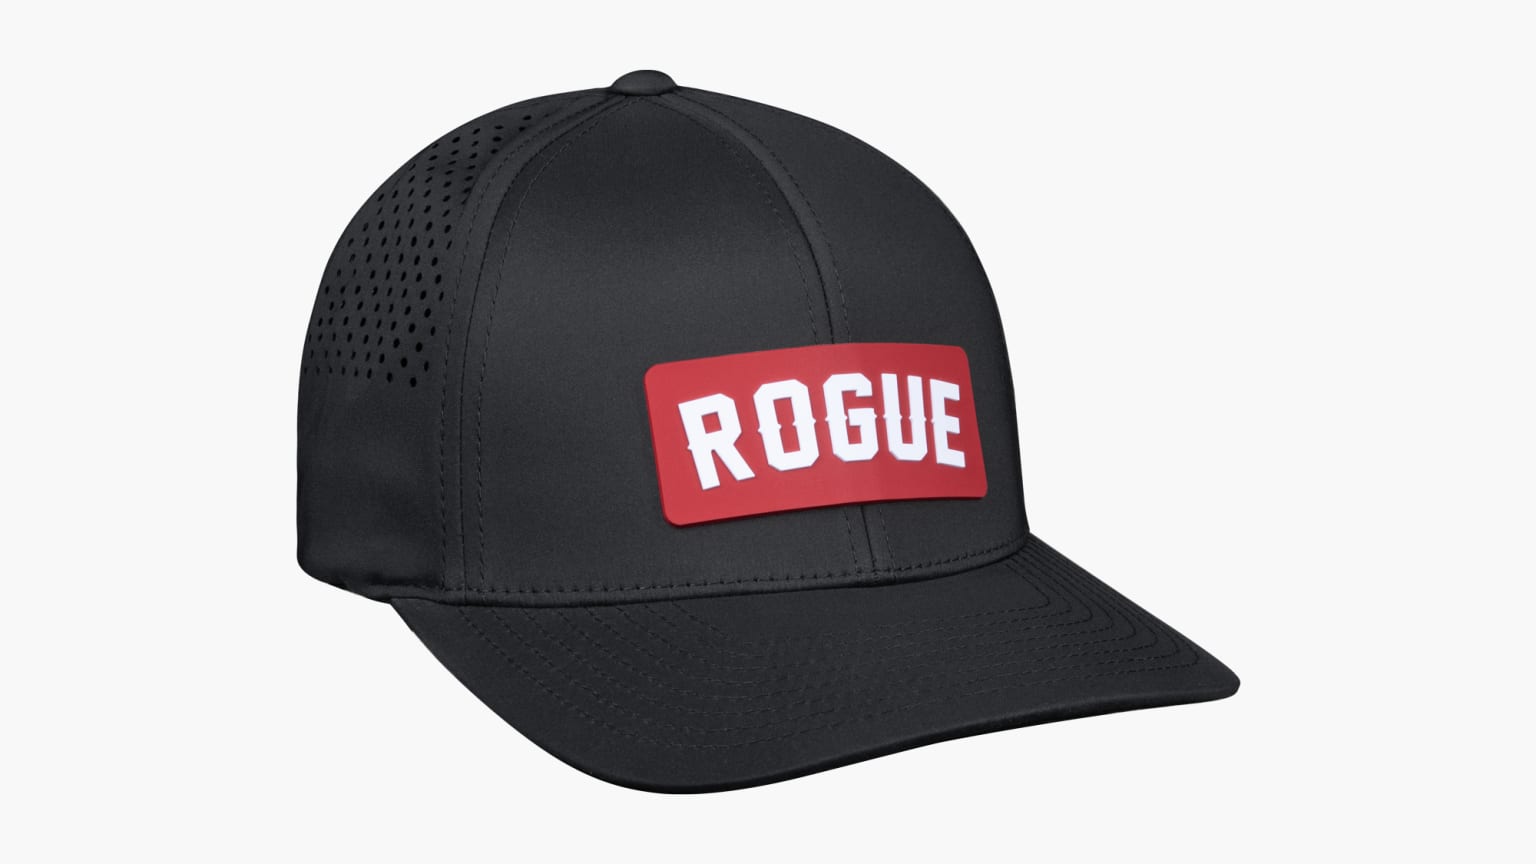 Rogue | Fitness Hat Black | Rogue Performance - Curved Branded Bills